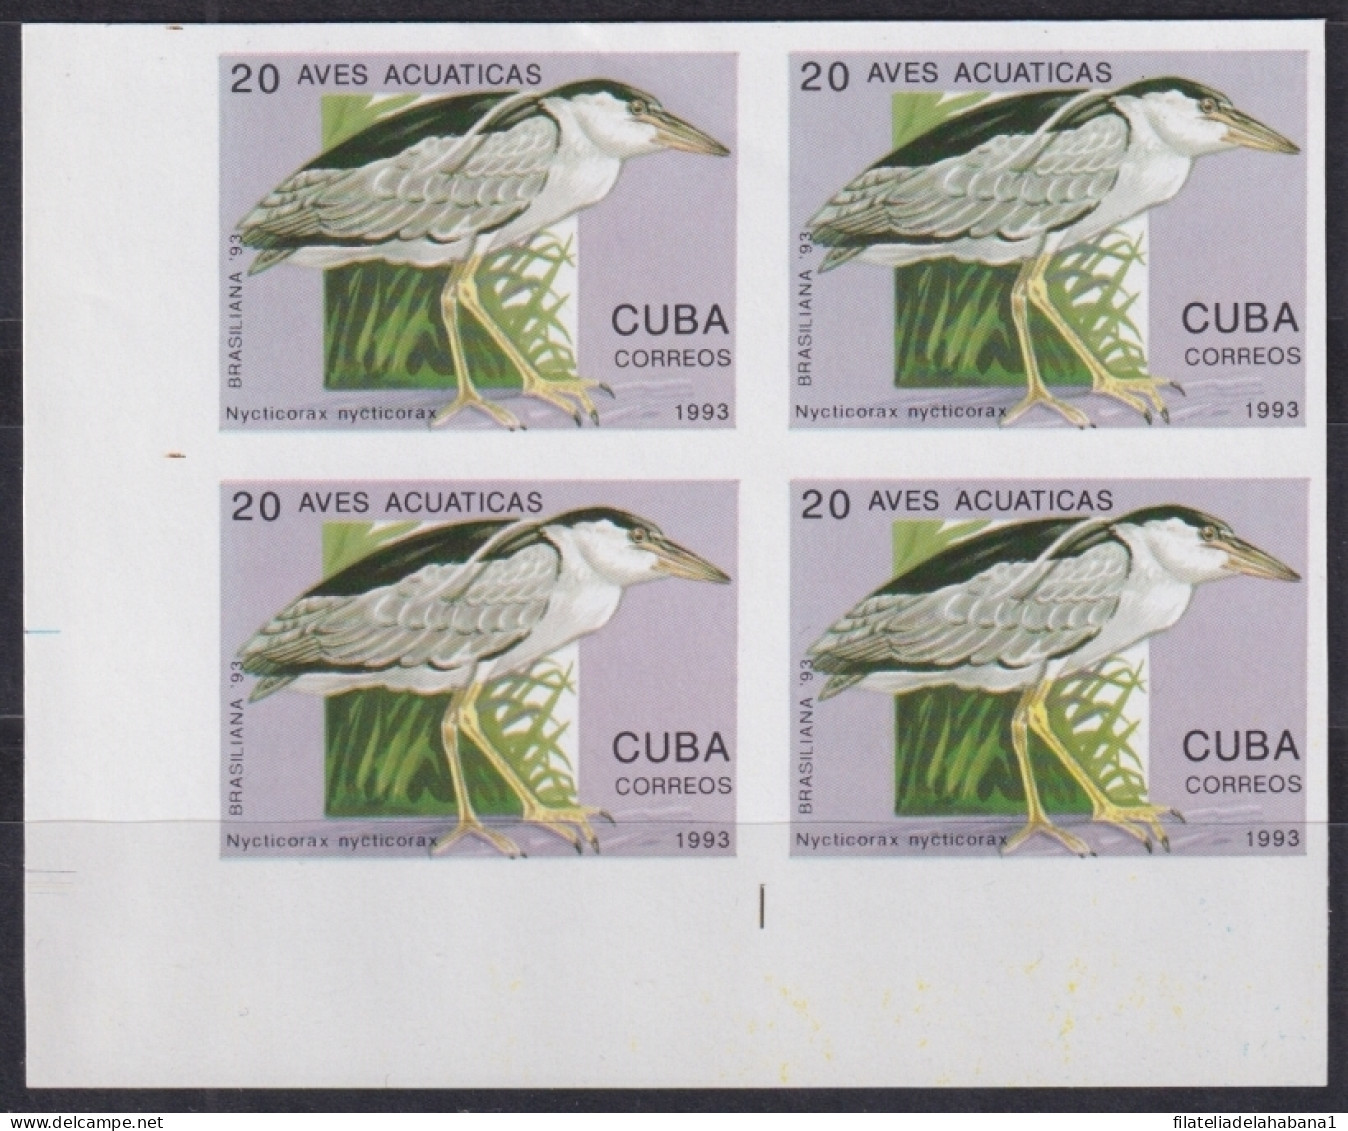 1993.186 CUBA 1993 20c WATER BIRD AVES PAJAROS IMPERFORATED PROOF BLOCK 4.  - Imperforates, Proofs & Errors